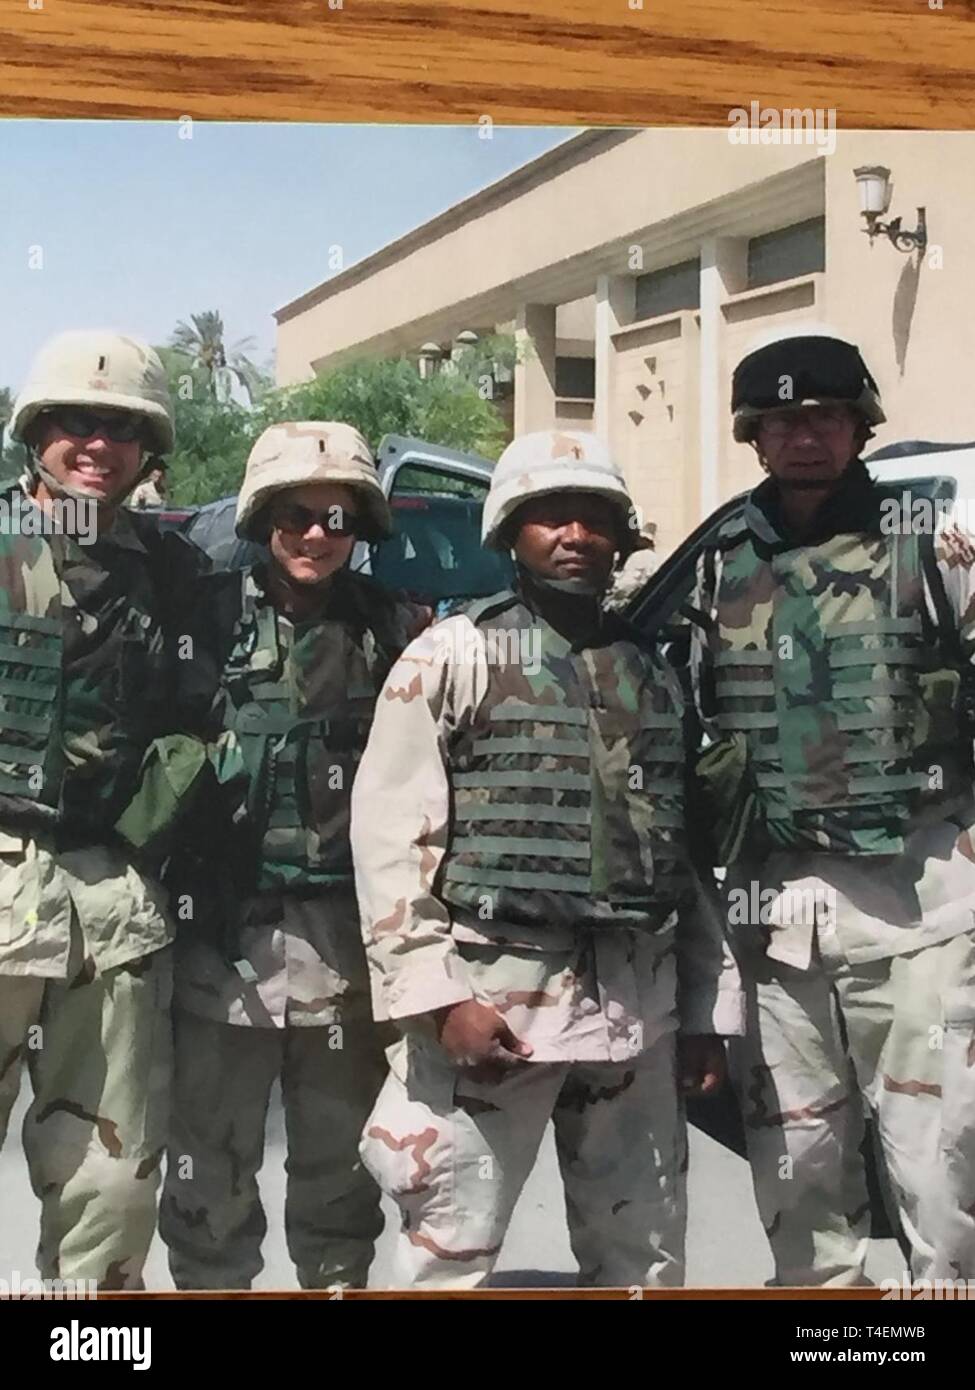 During Operation Iraqi Freedom, 1st Sgt. Charles Kampa, right, with 452nd  Combat Support Hospital, poses with members of the unit while in Iraq in  2003. Kampa is part of four generations of